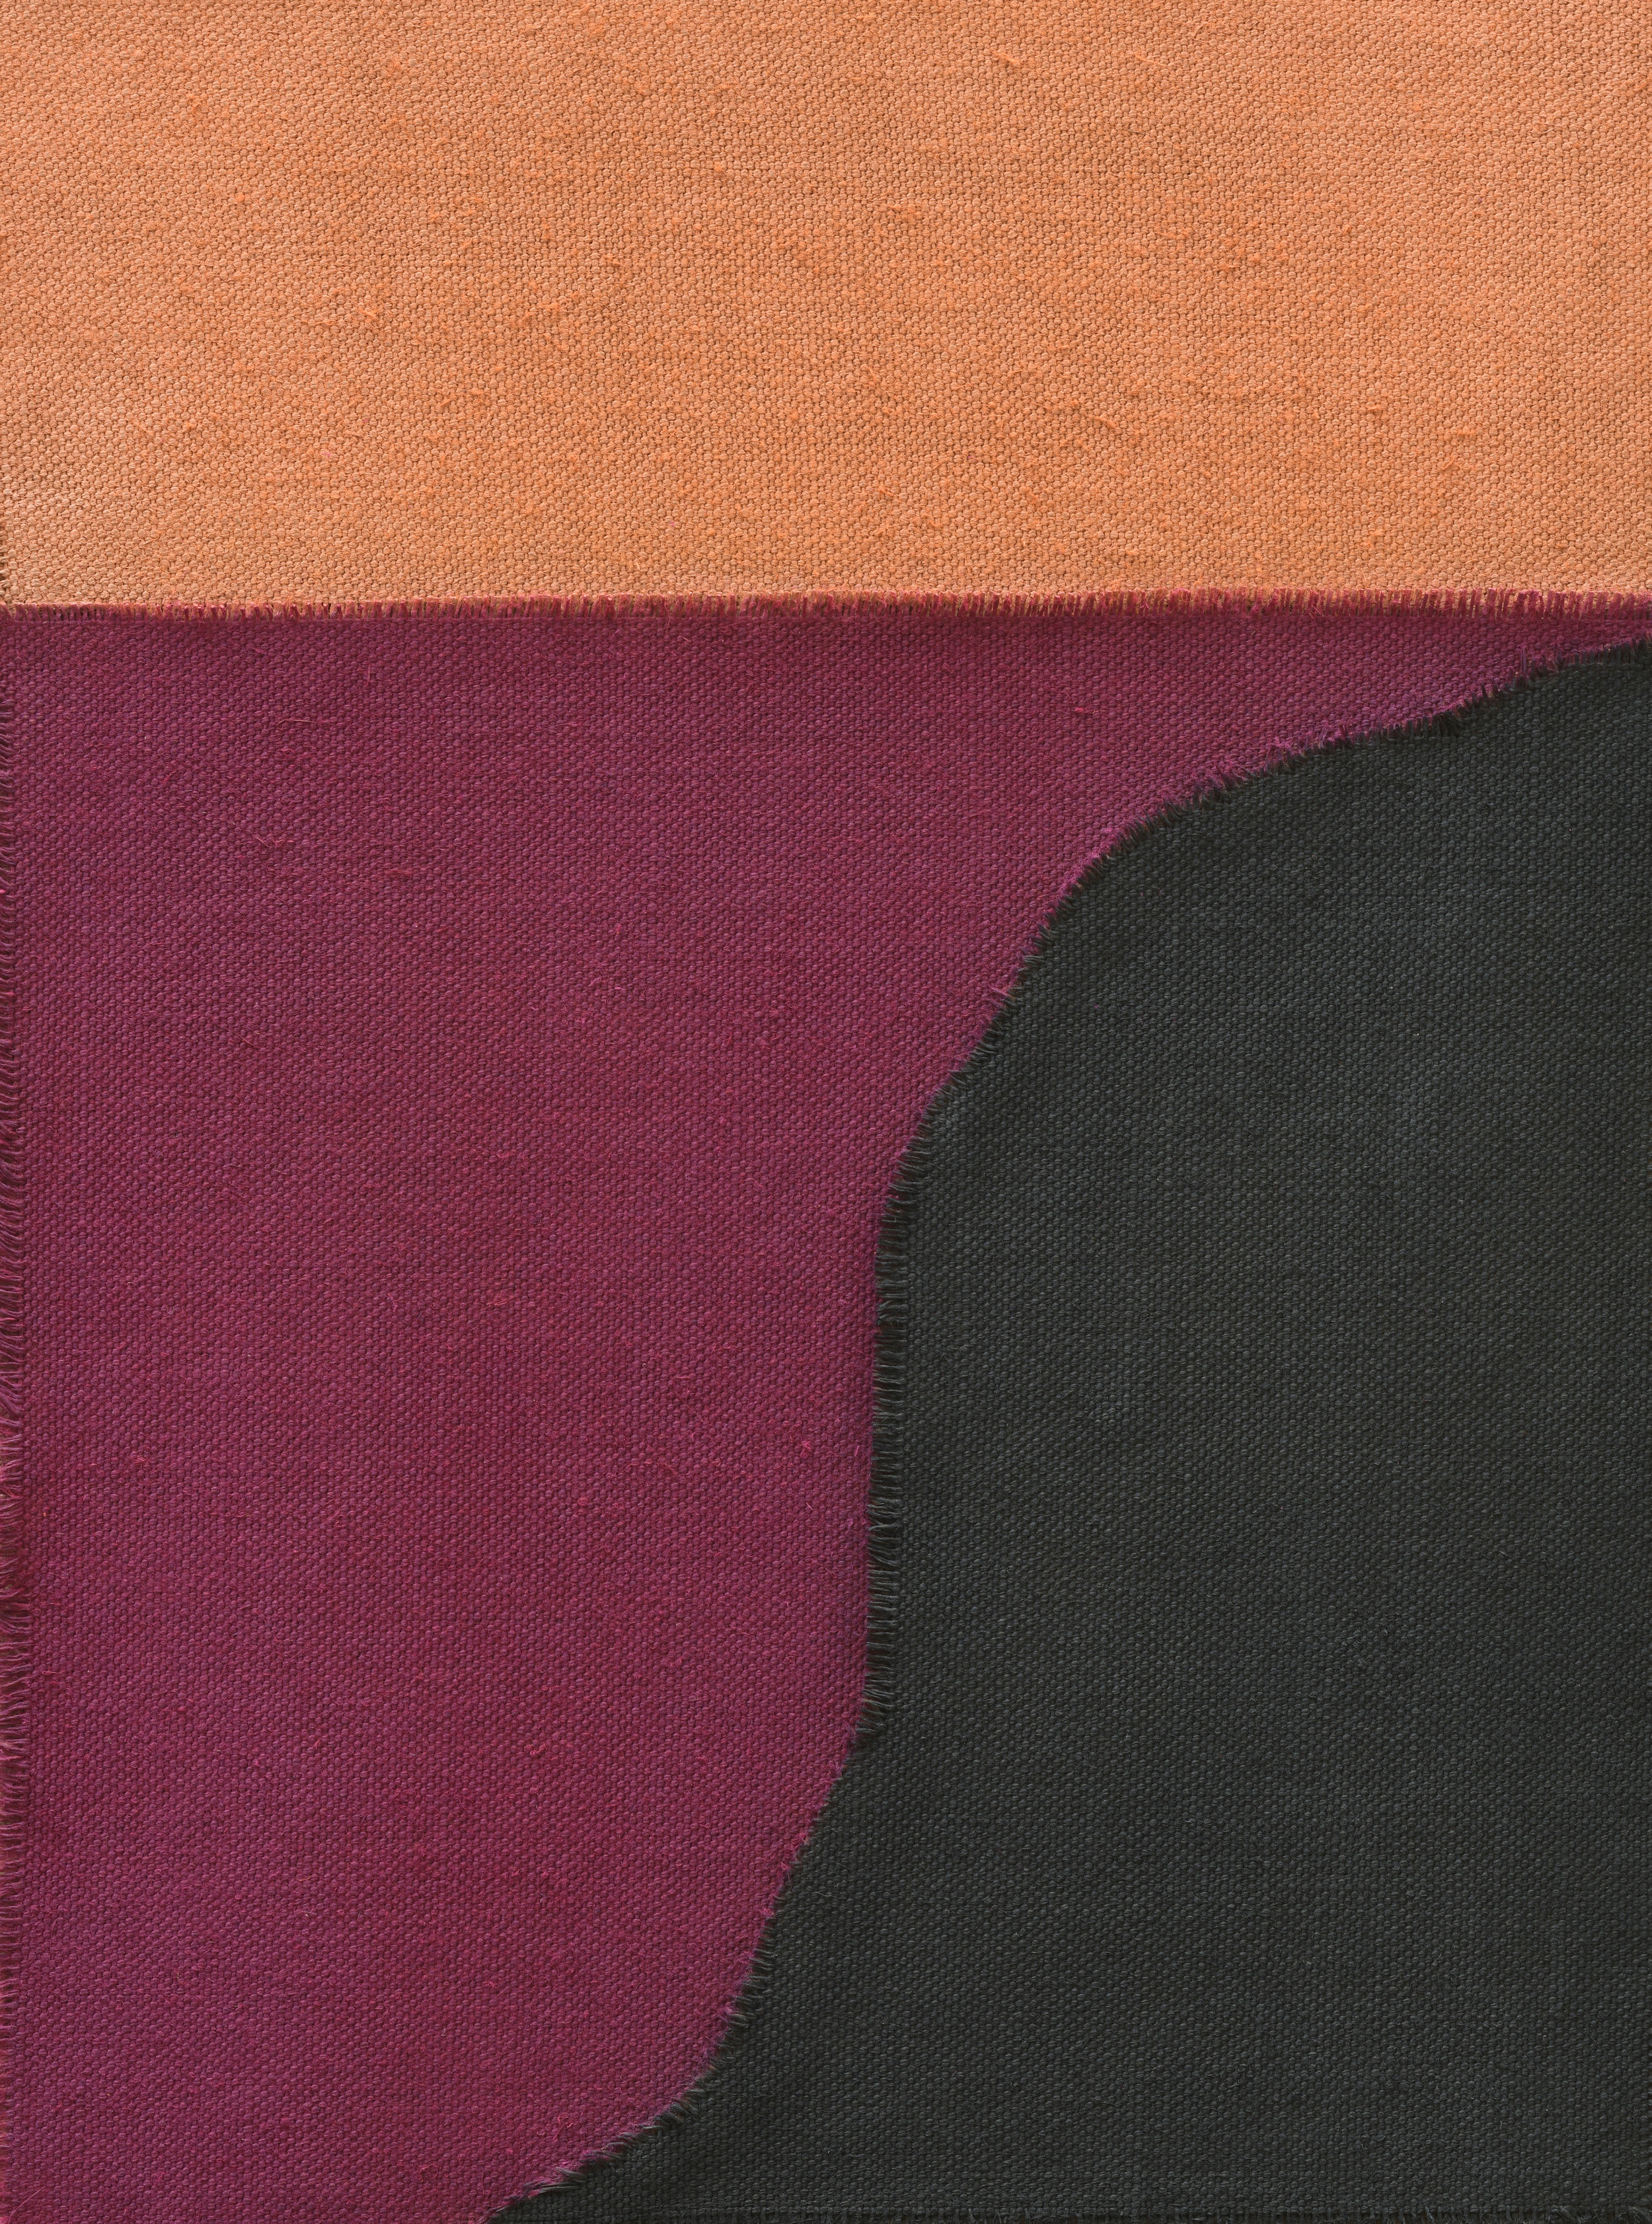  Untitled (Hot Orange / Pink), 2019. Oil on Collaged Linen, 16 x 12 inches.  